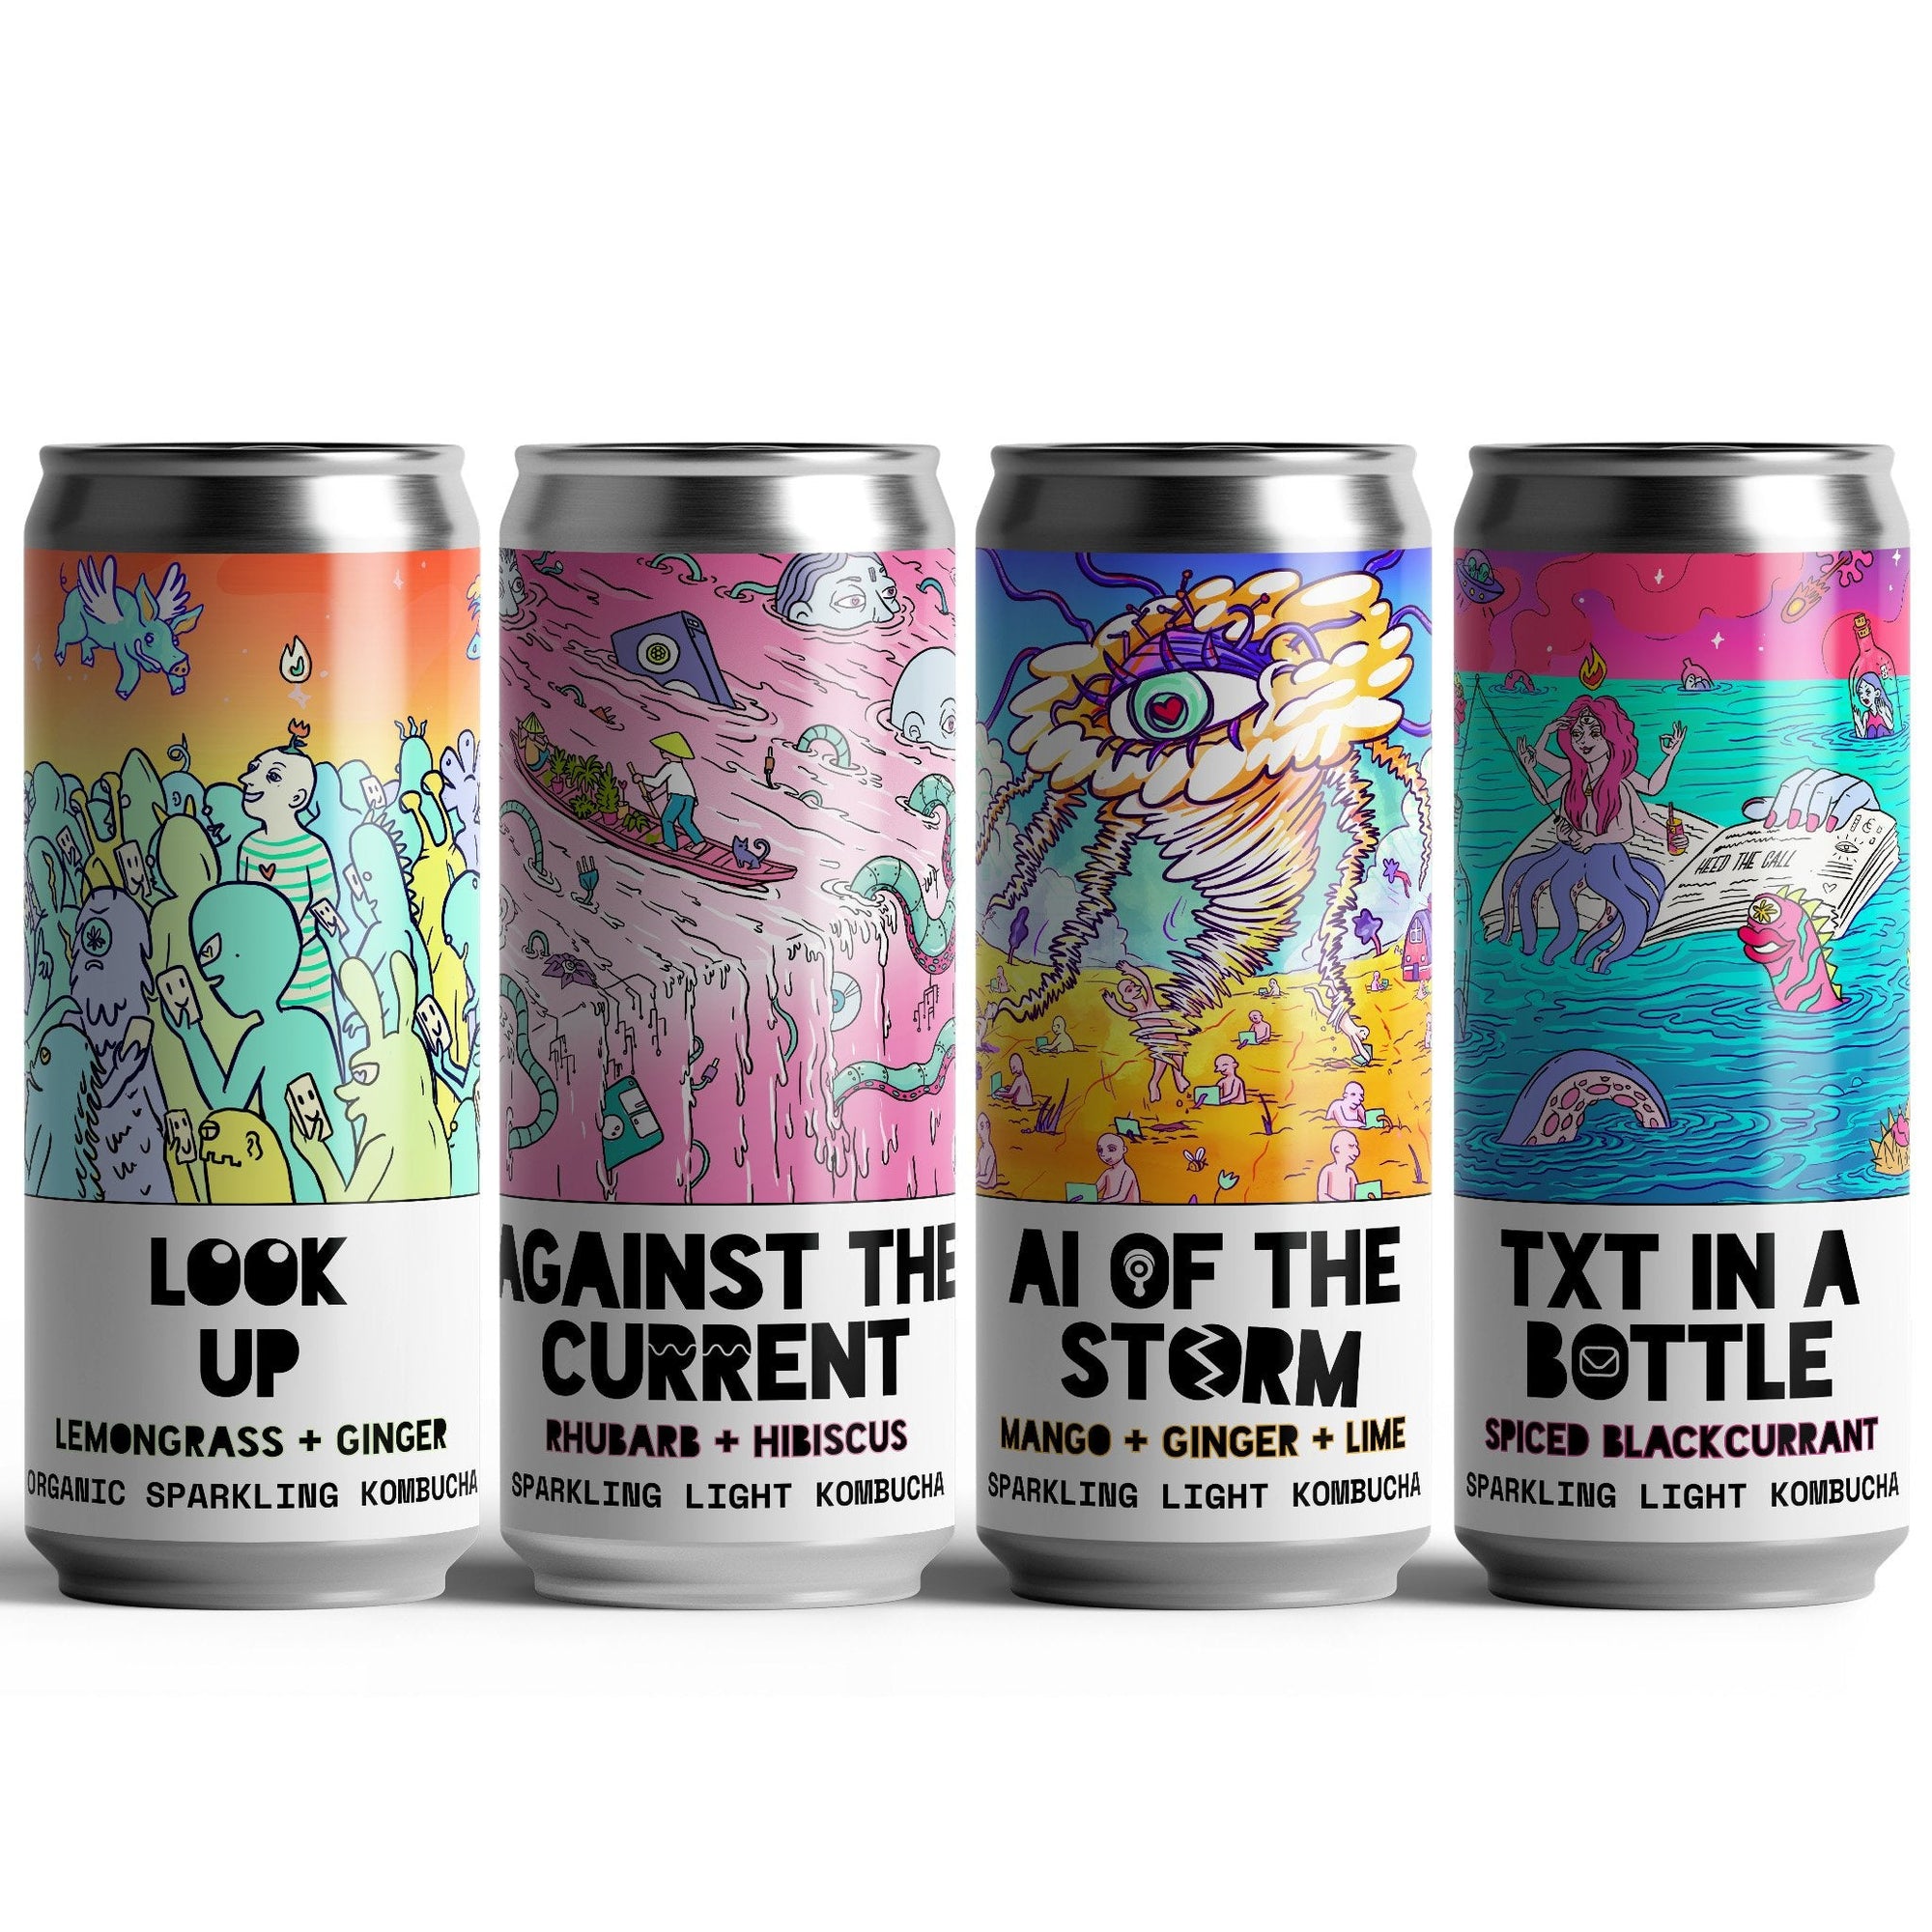 Four cans of sparkling light kombucha drinks by Counter Culture Drinks